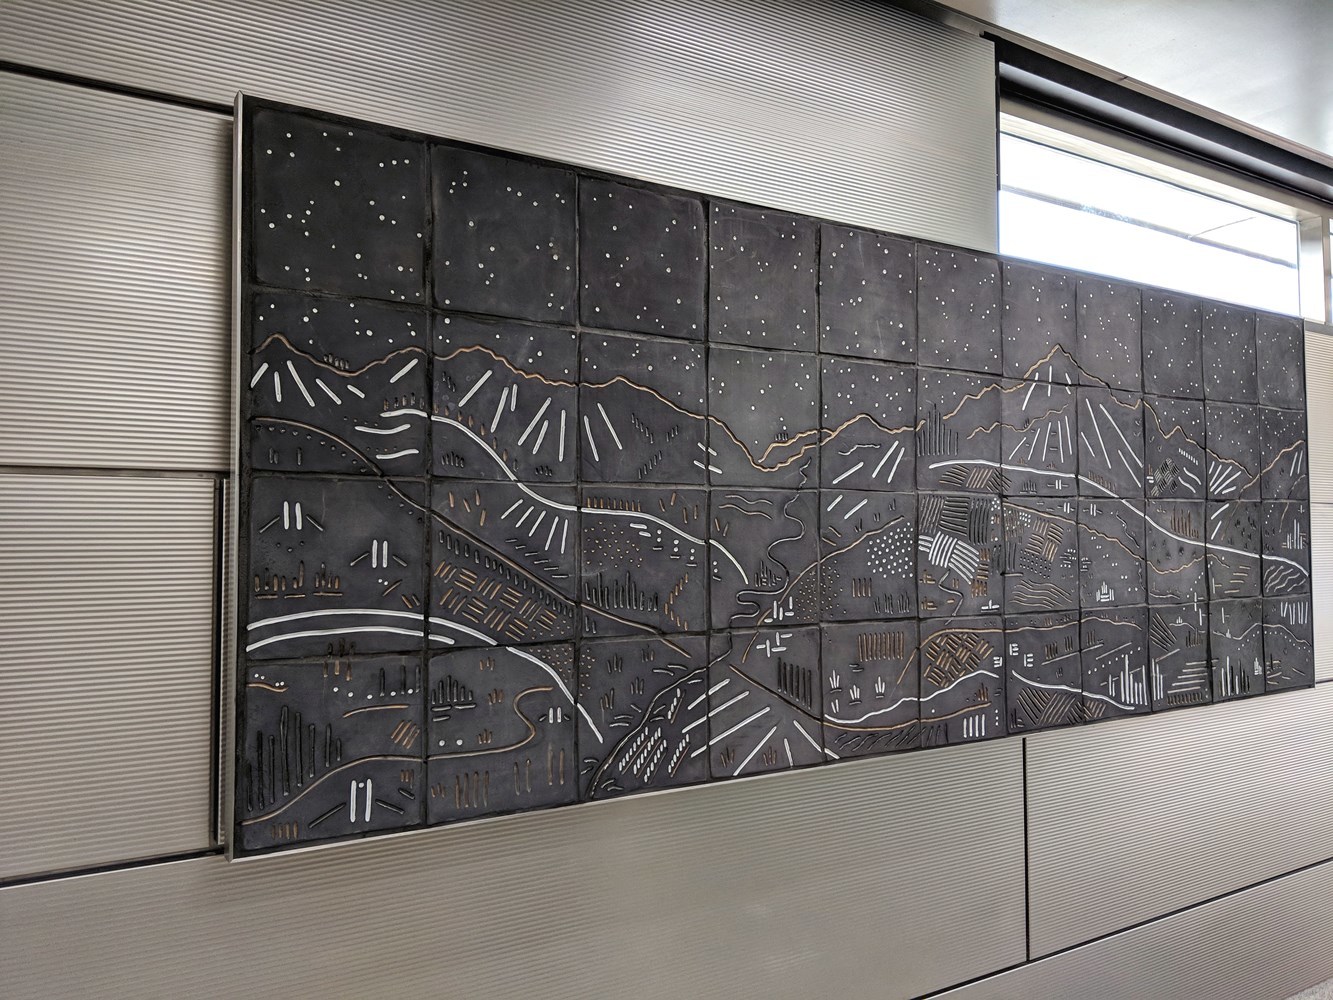 IMD station features a new series of artwork known as "Vacation" by Chicago artists Jason Messinger. Shown is the "Vista" mural in the Ogden Avenue entrance.